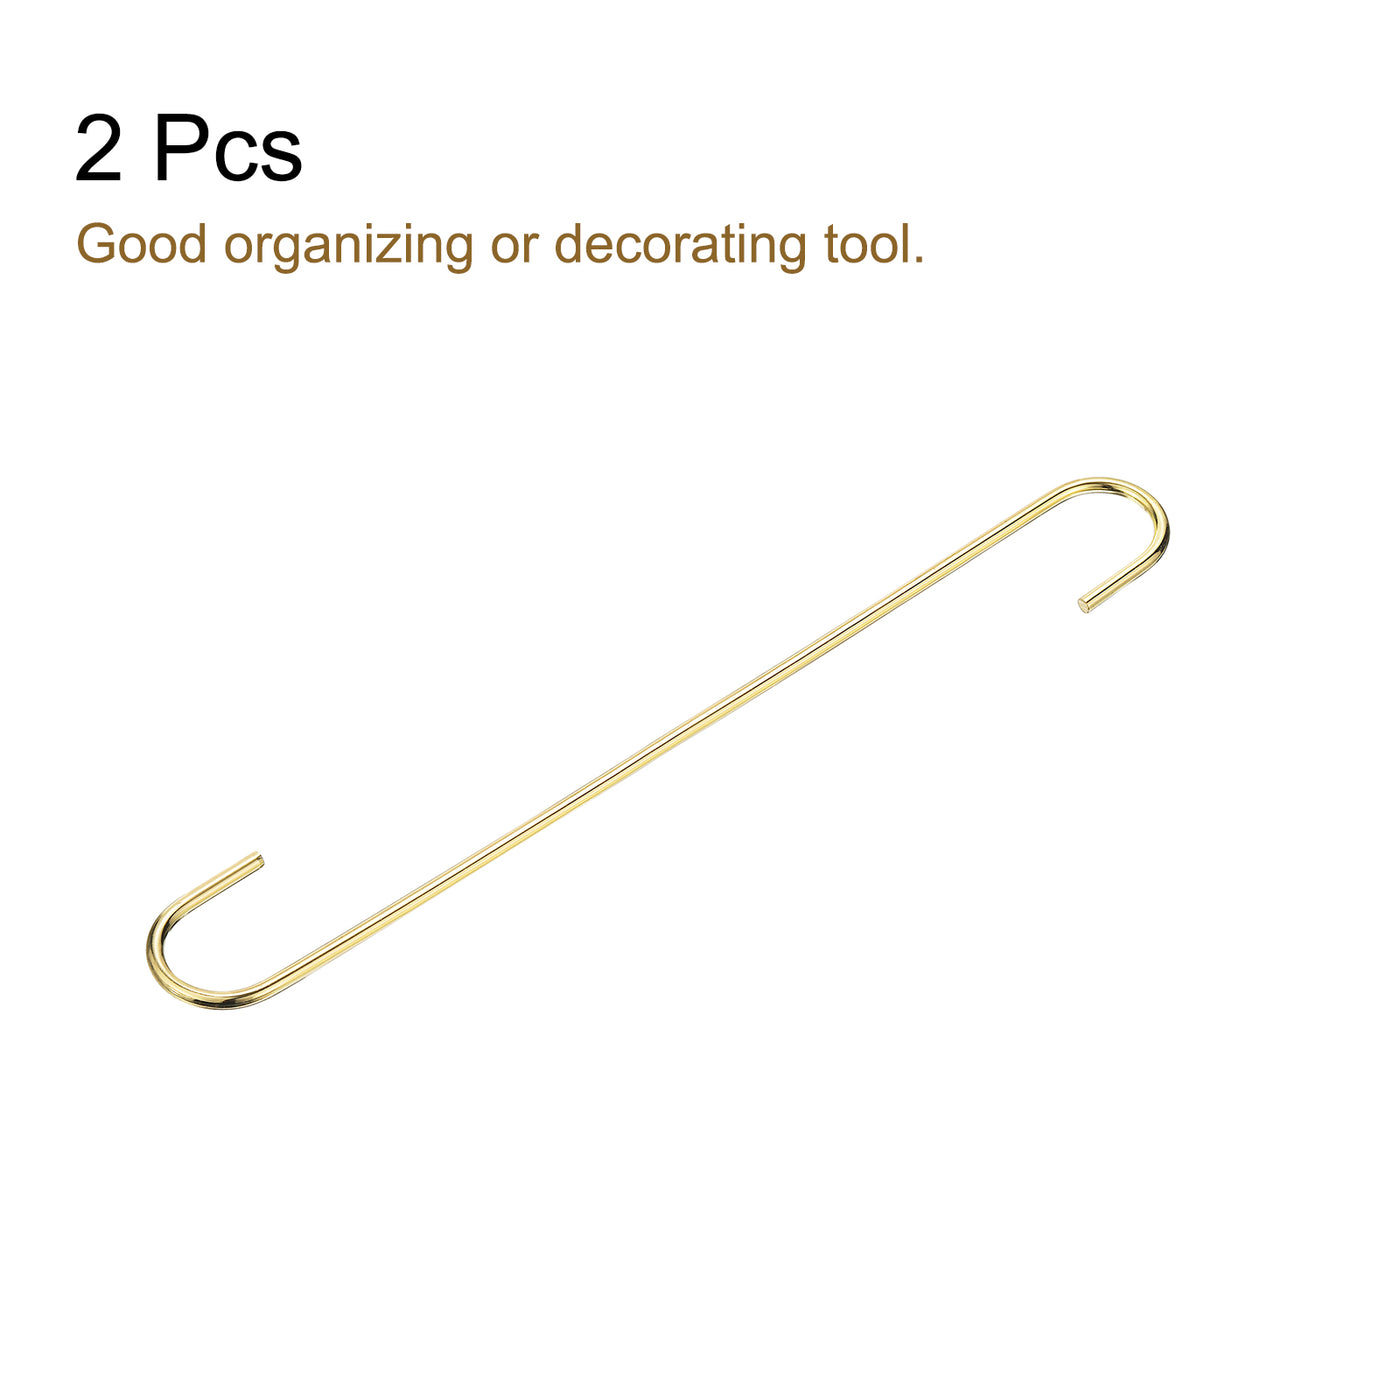 uxcell Uxcell S Hanging Hooks, 12inch(300mm) Extra Long Steel Hanger, Indoor Outdoor Uses for Garden, Bathroom, Closet, Workshop, Kitchen, Gold Tone, 2Pcs